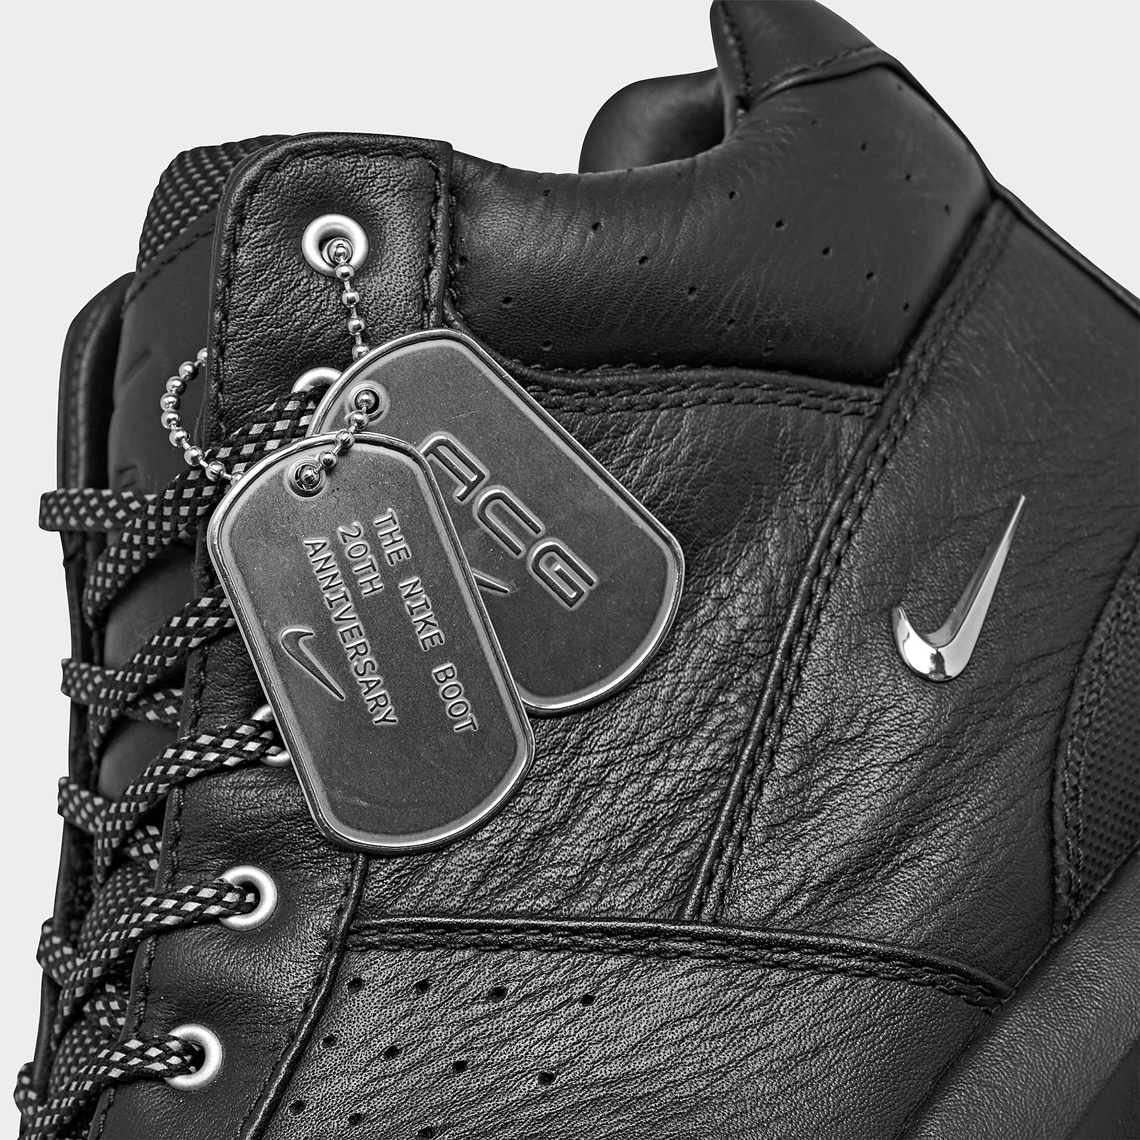 nike boots all black